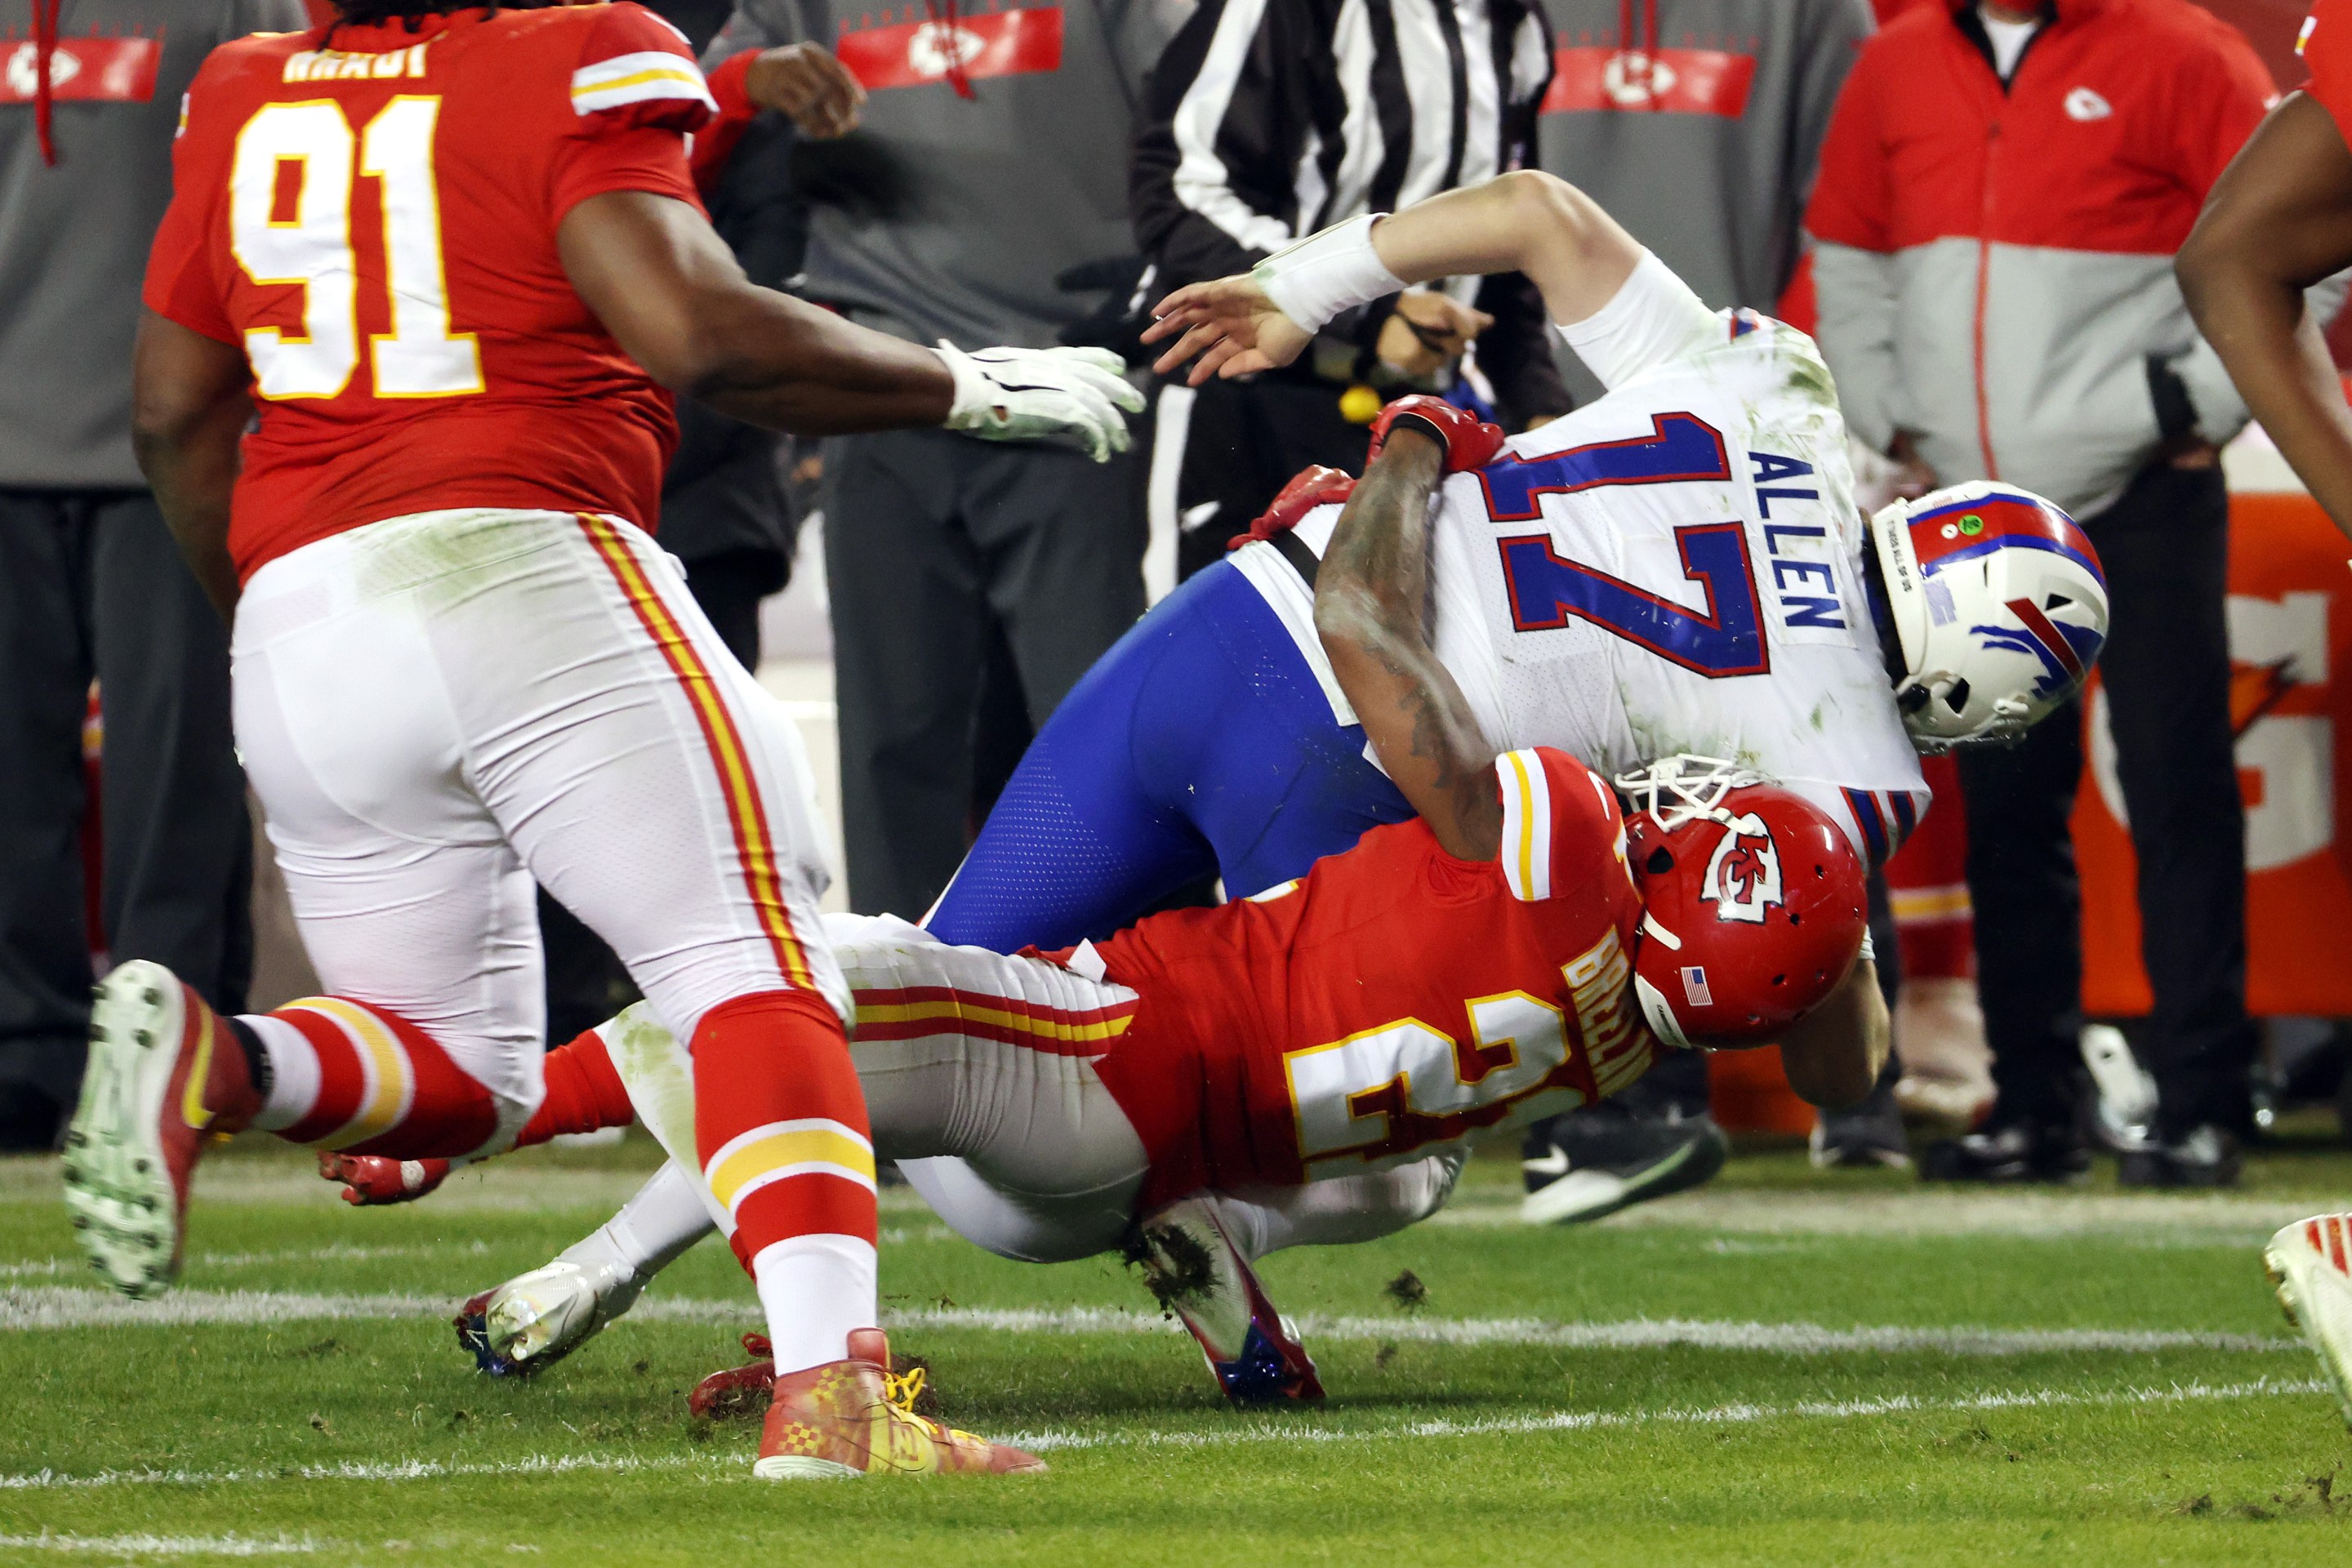 Josh Allen #17 of the Buffalo Bills is tackled by Bashaud Breeland #21 of the Kansas City Chiefs